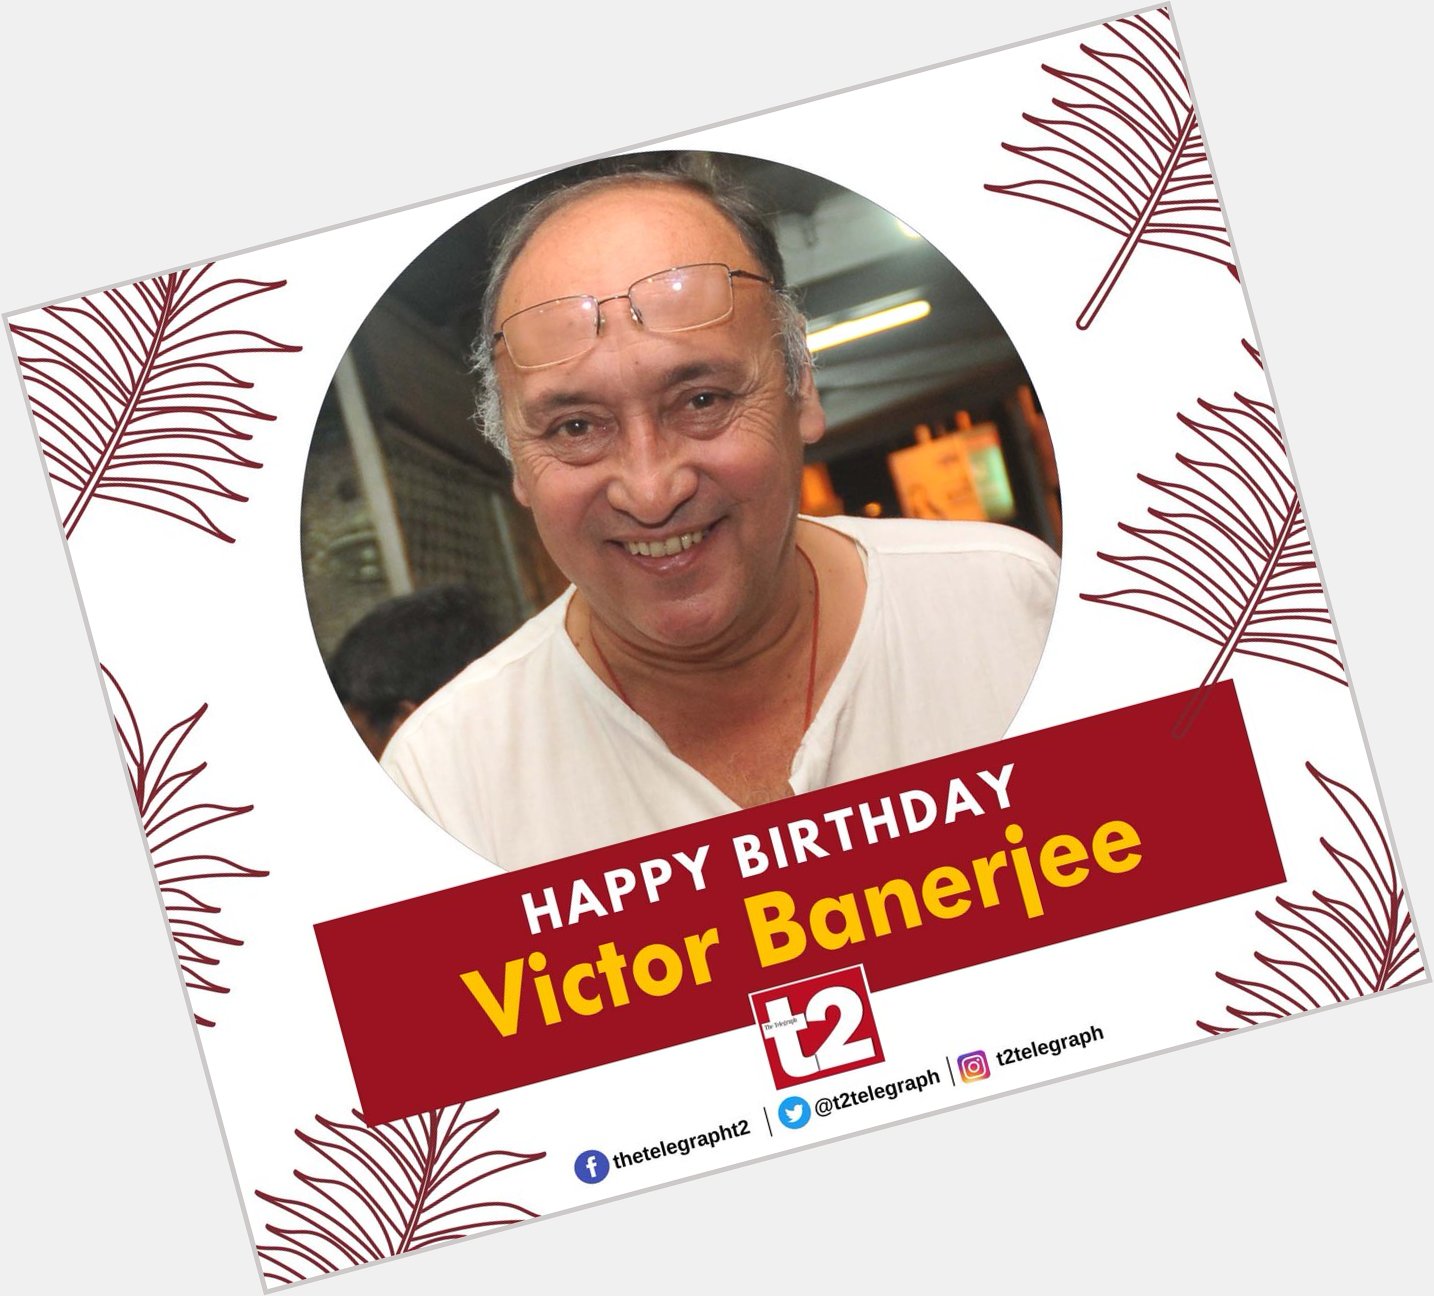 He brings a special something to every role. t2 wishes screen maverick Victor Banerjee a very happy birthday 